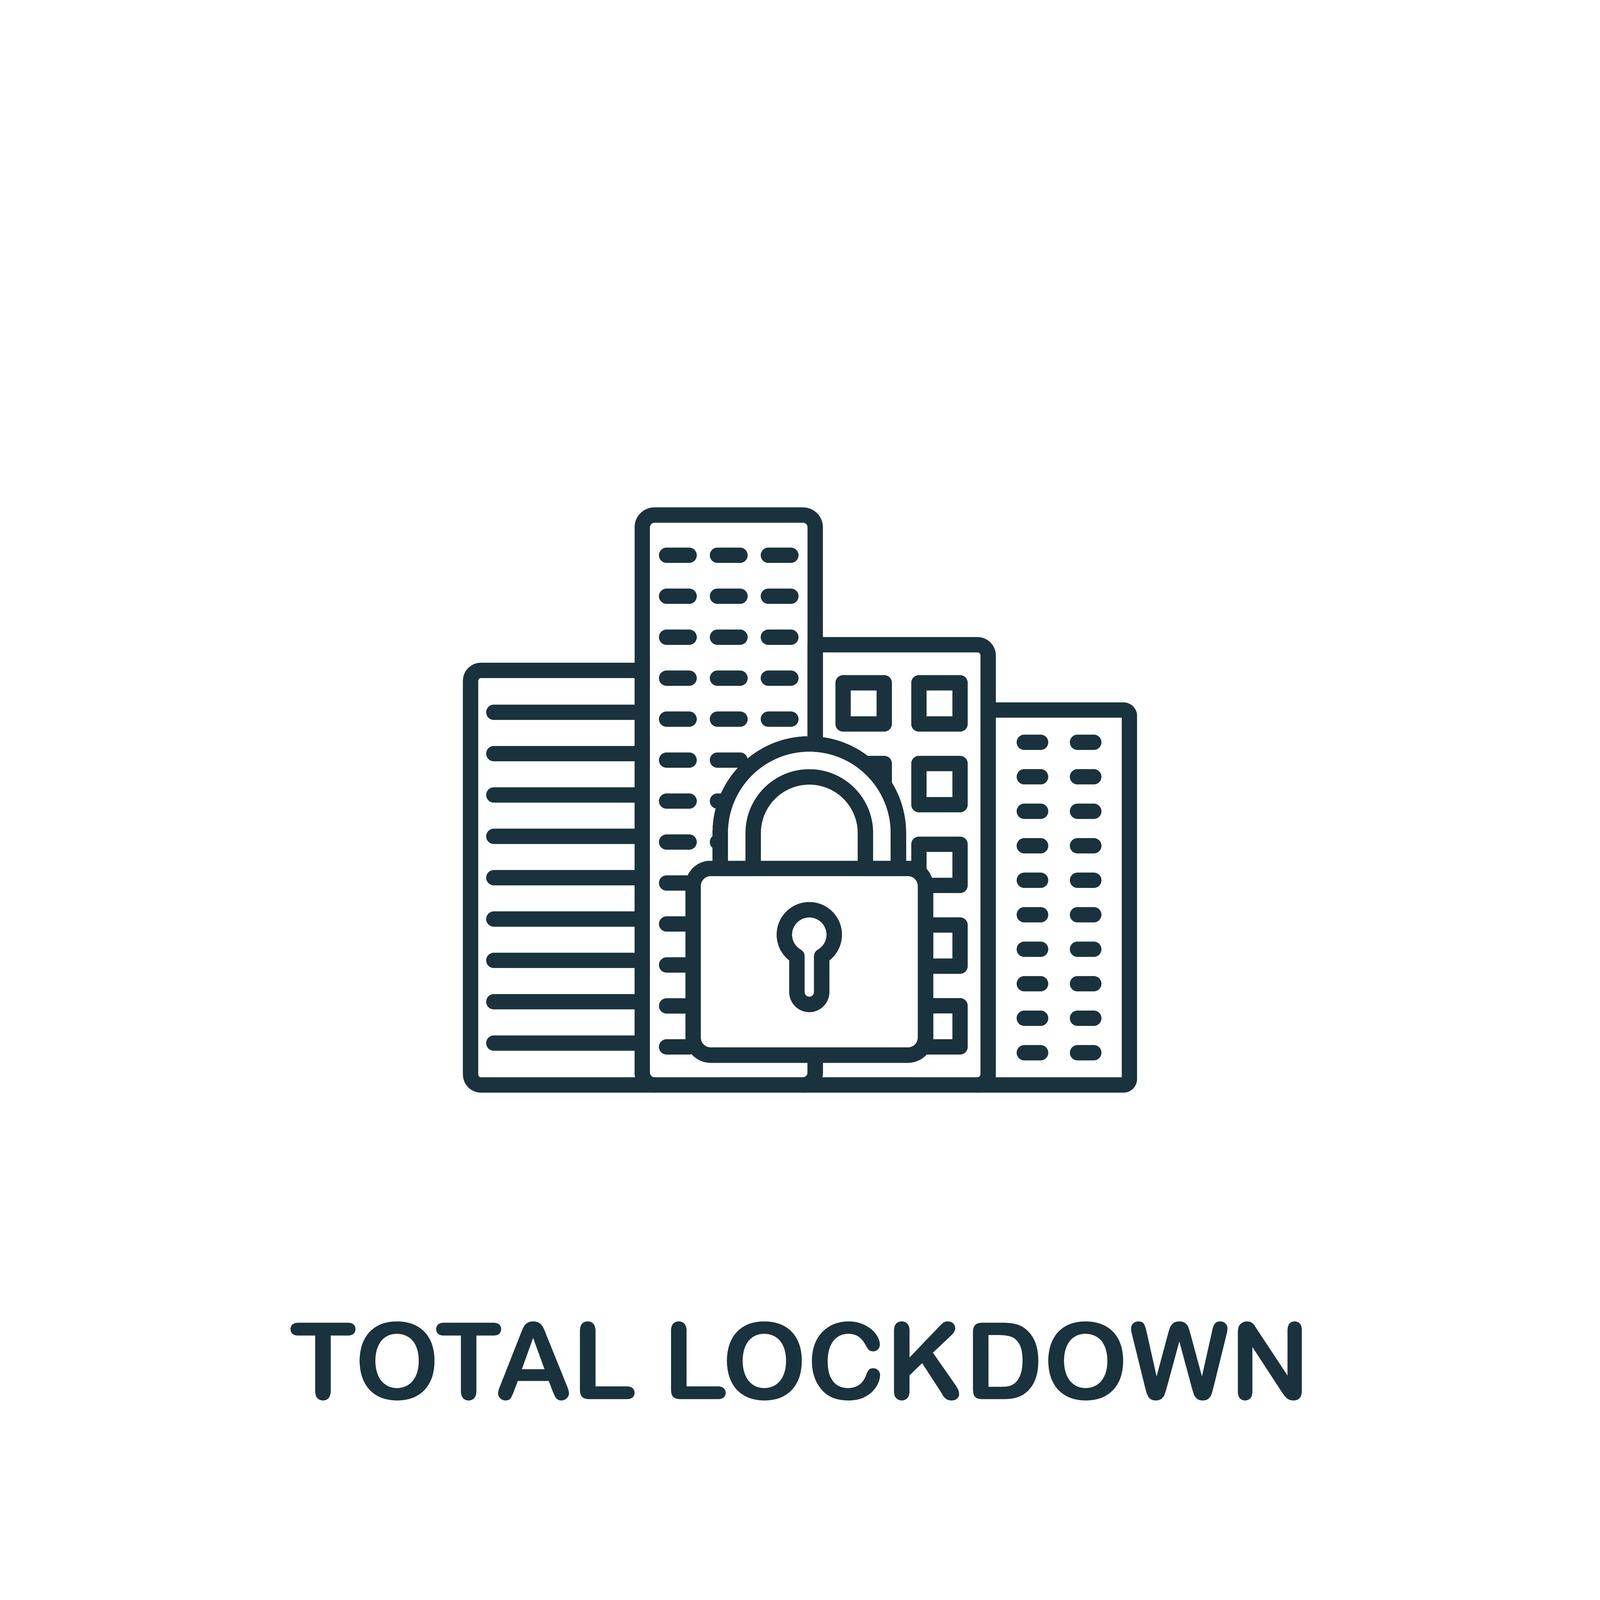 Total Lockdown icon. Line simple Quarantine icon for templates, web design and infographics by simakovavector